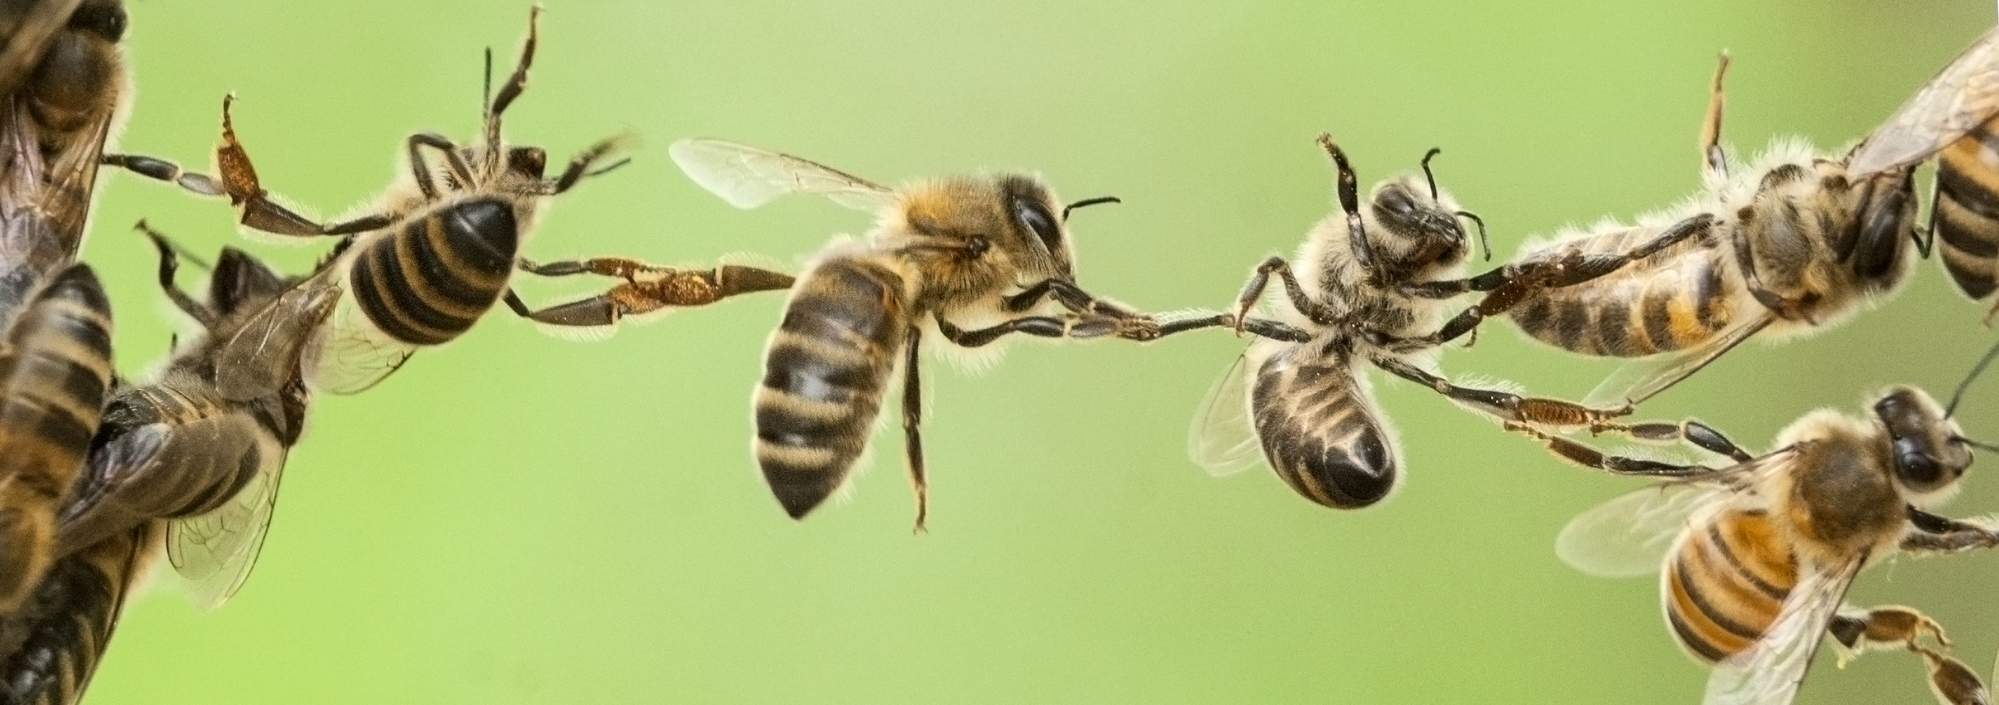 Bees hanging onto each other